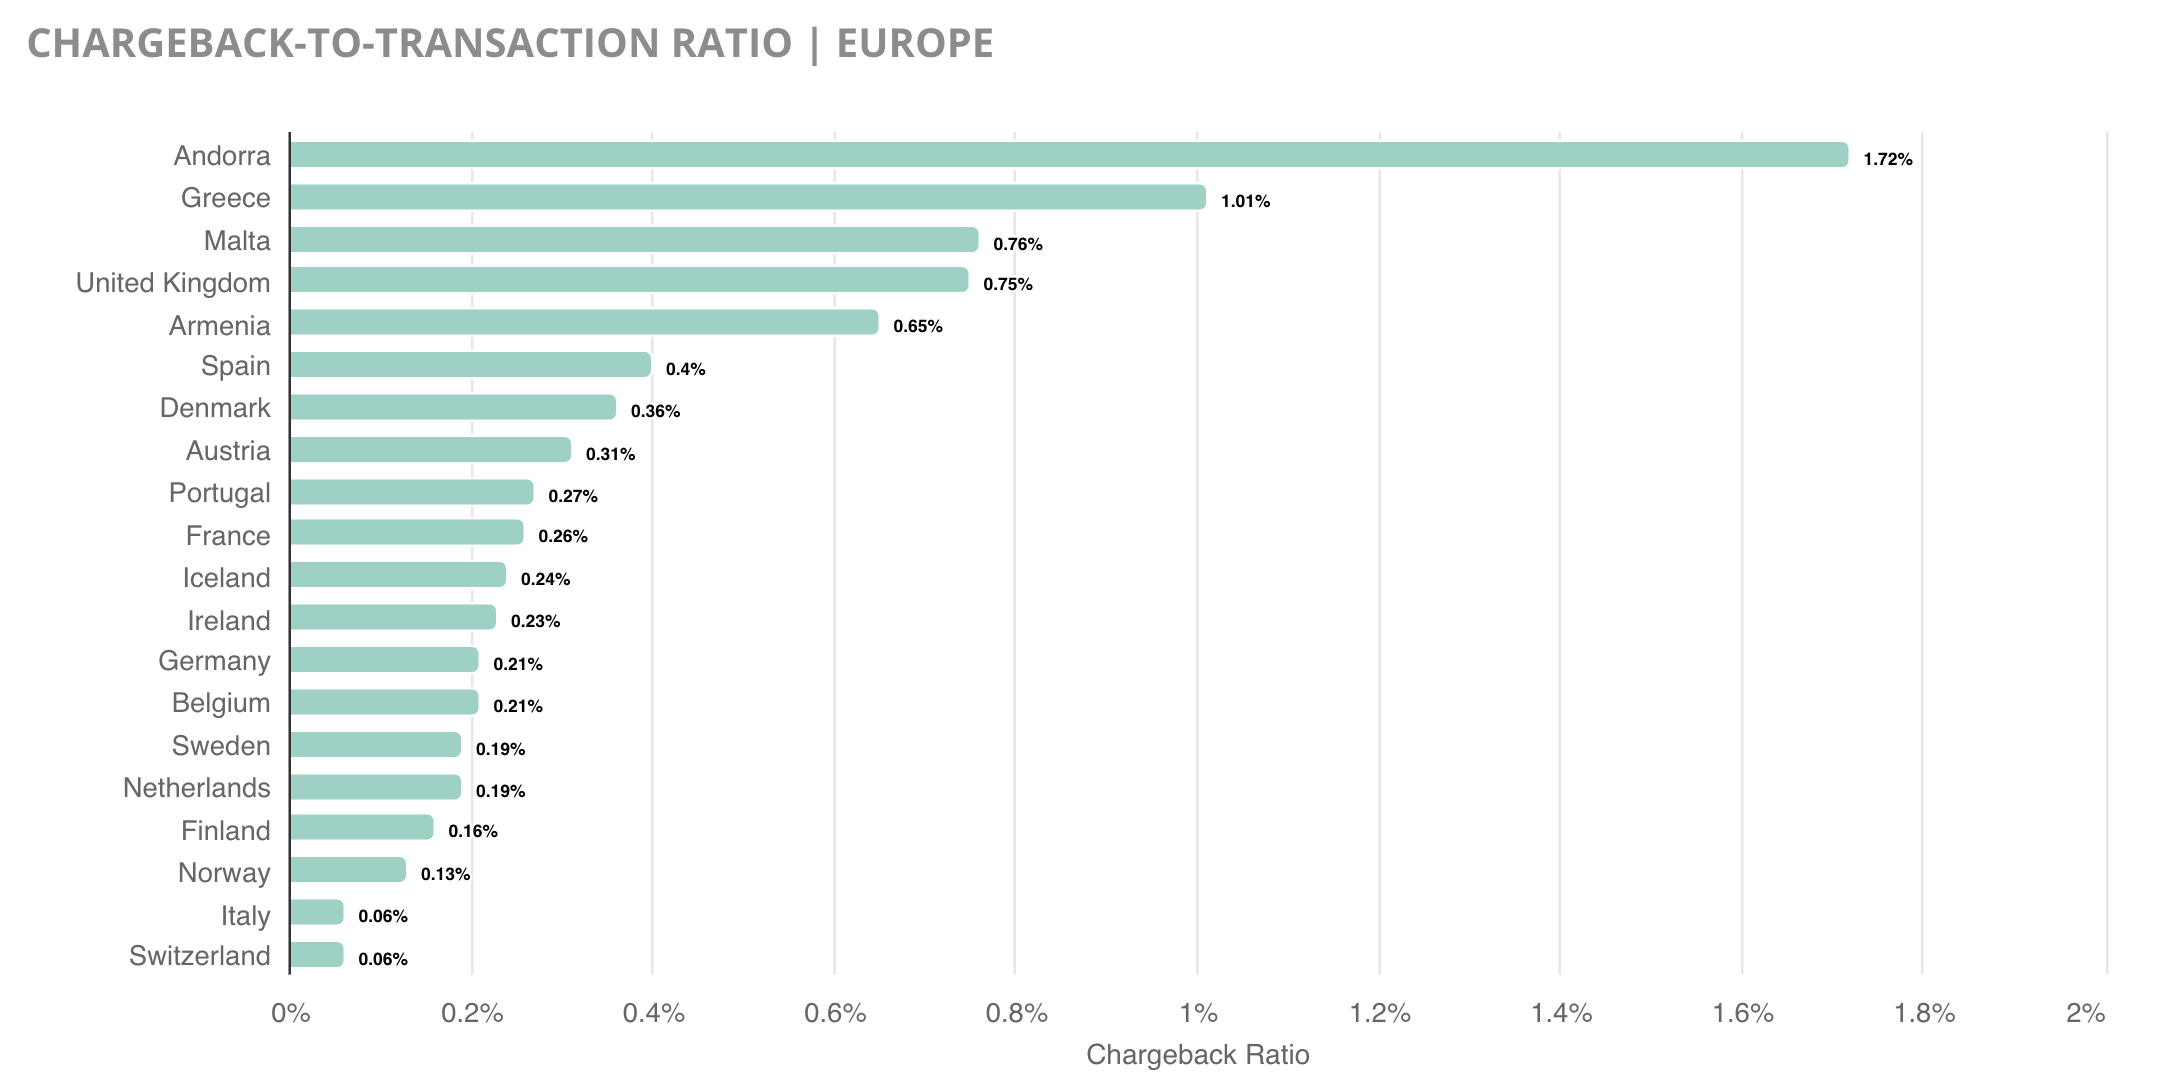 Chargeback-to-transaction ratio in Europe